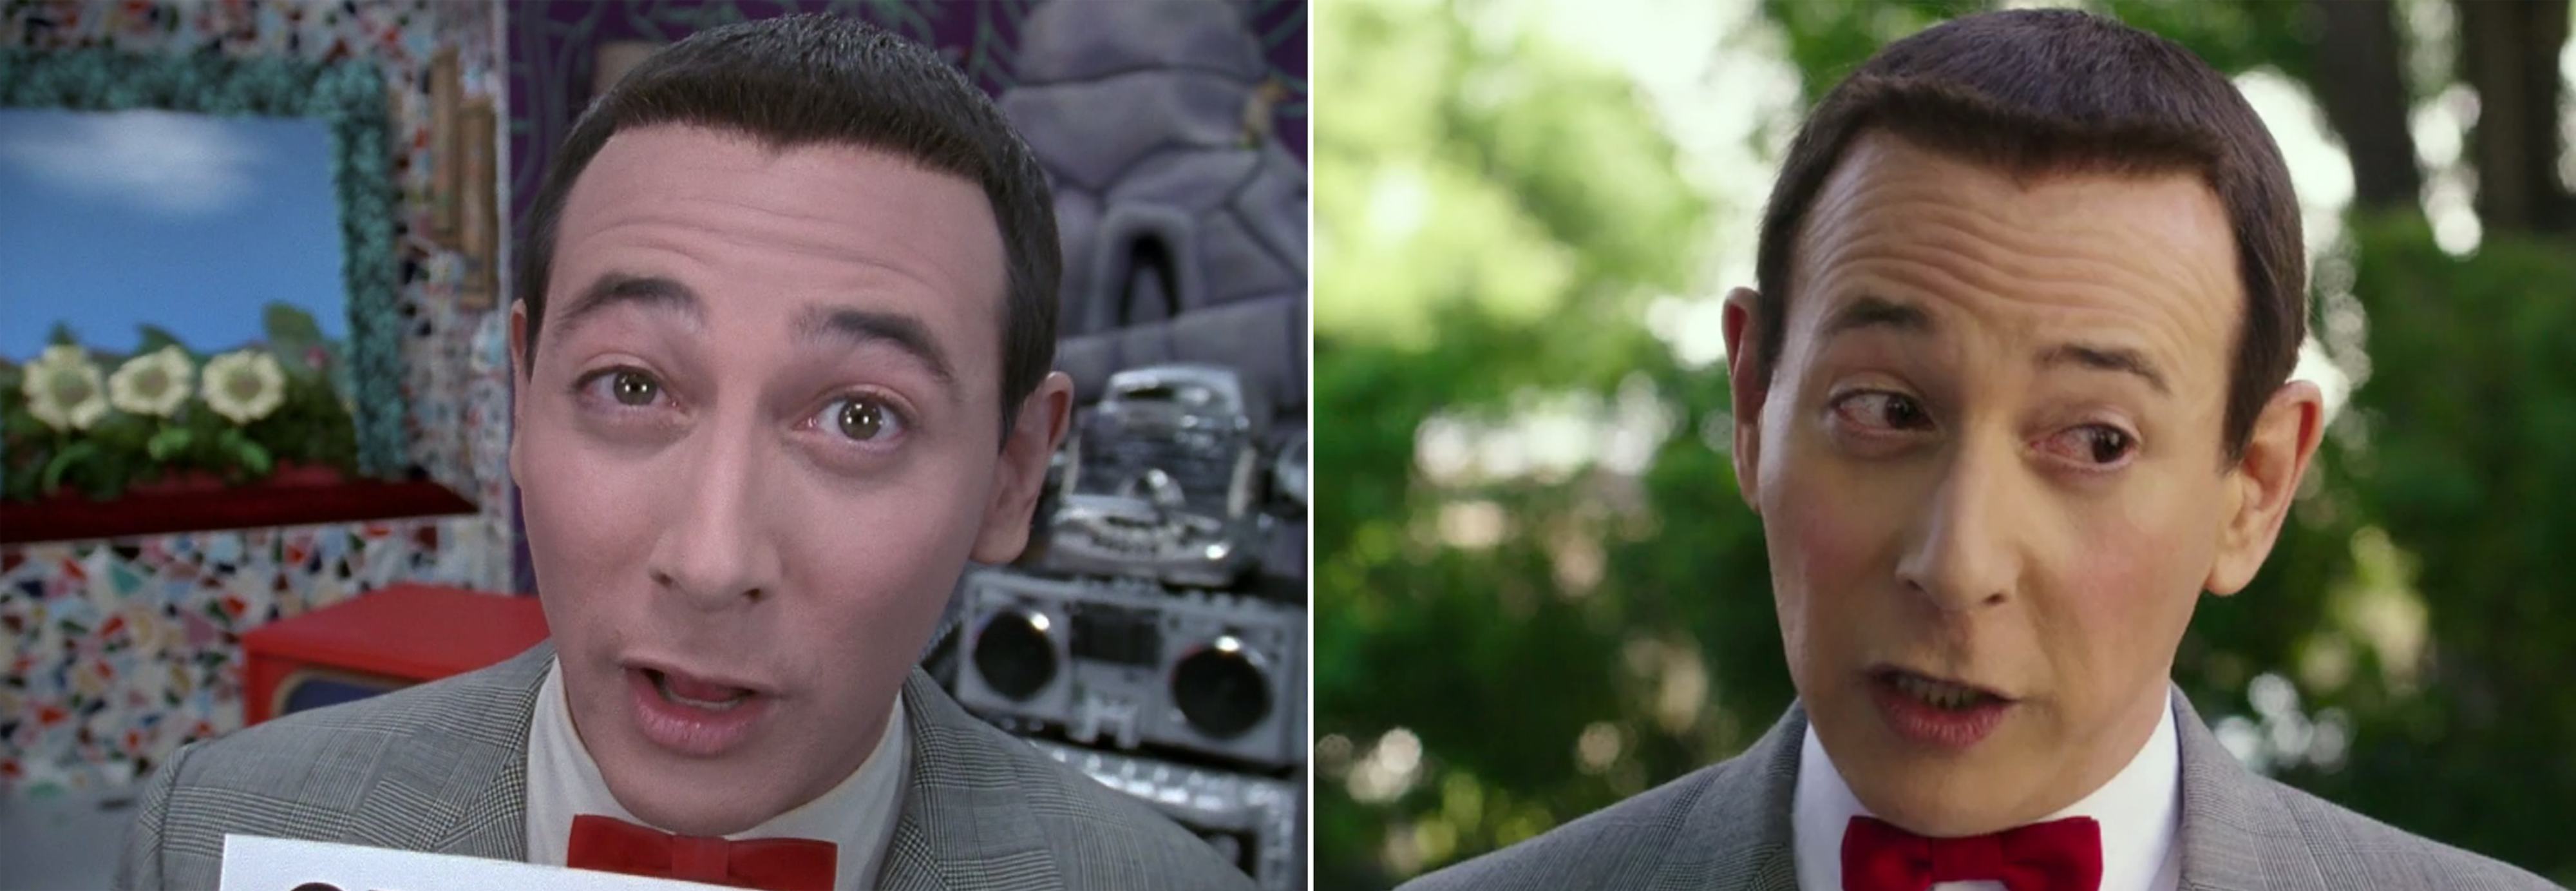 The Secret Tech That Made Pee Wee Herman Young Again For His Big Holiday